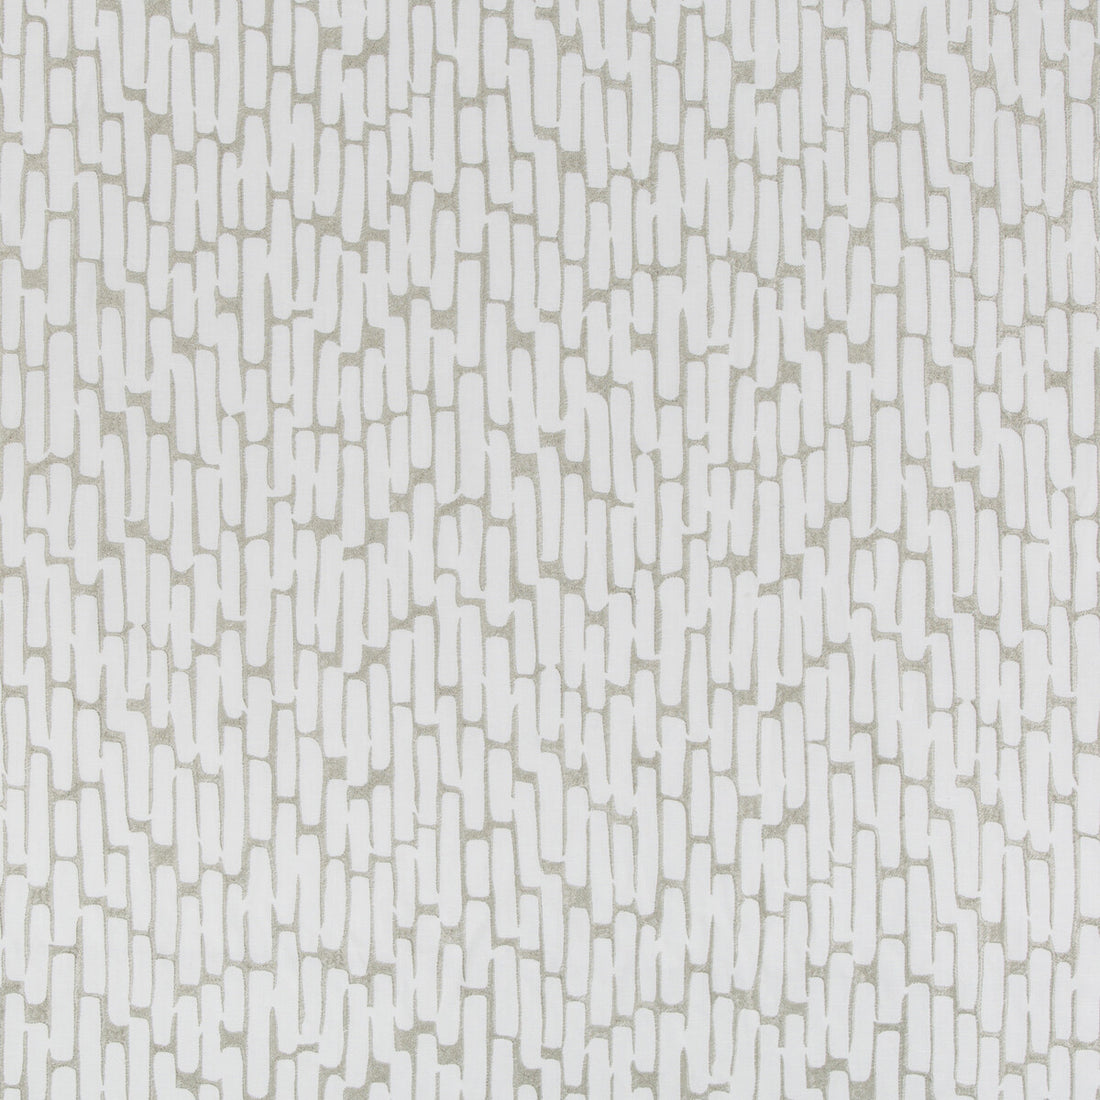 Seahorn fabric in sand color - pattern 4552.16.0 - by Kravet Basics in the Jeffrey Alan Marks Oceanview collection